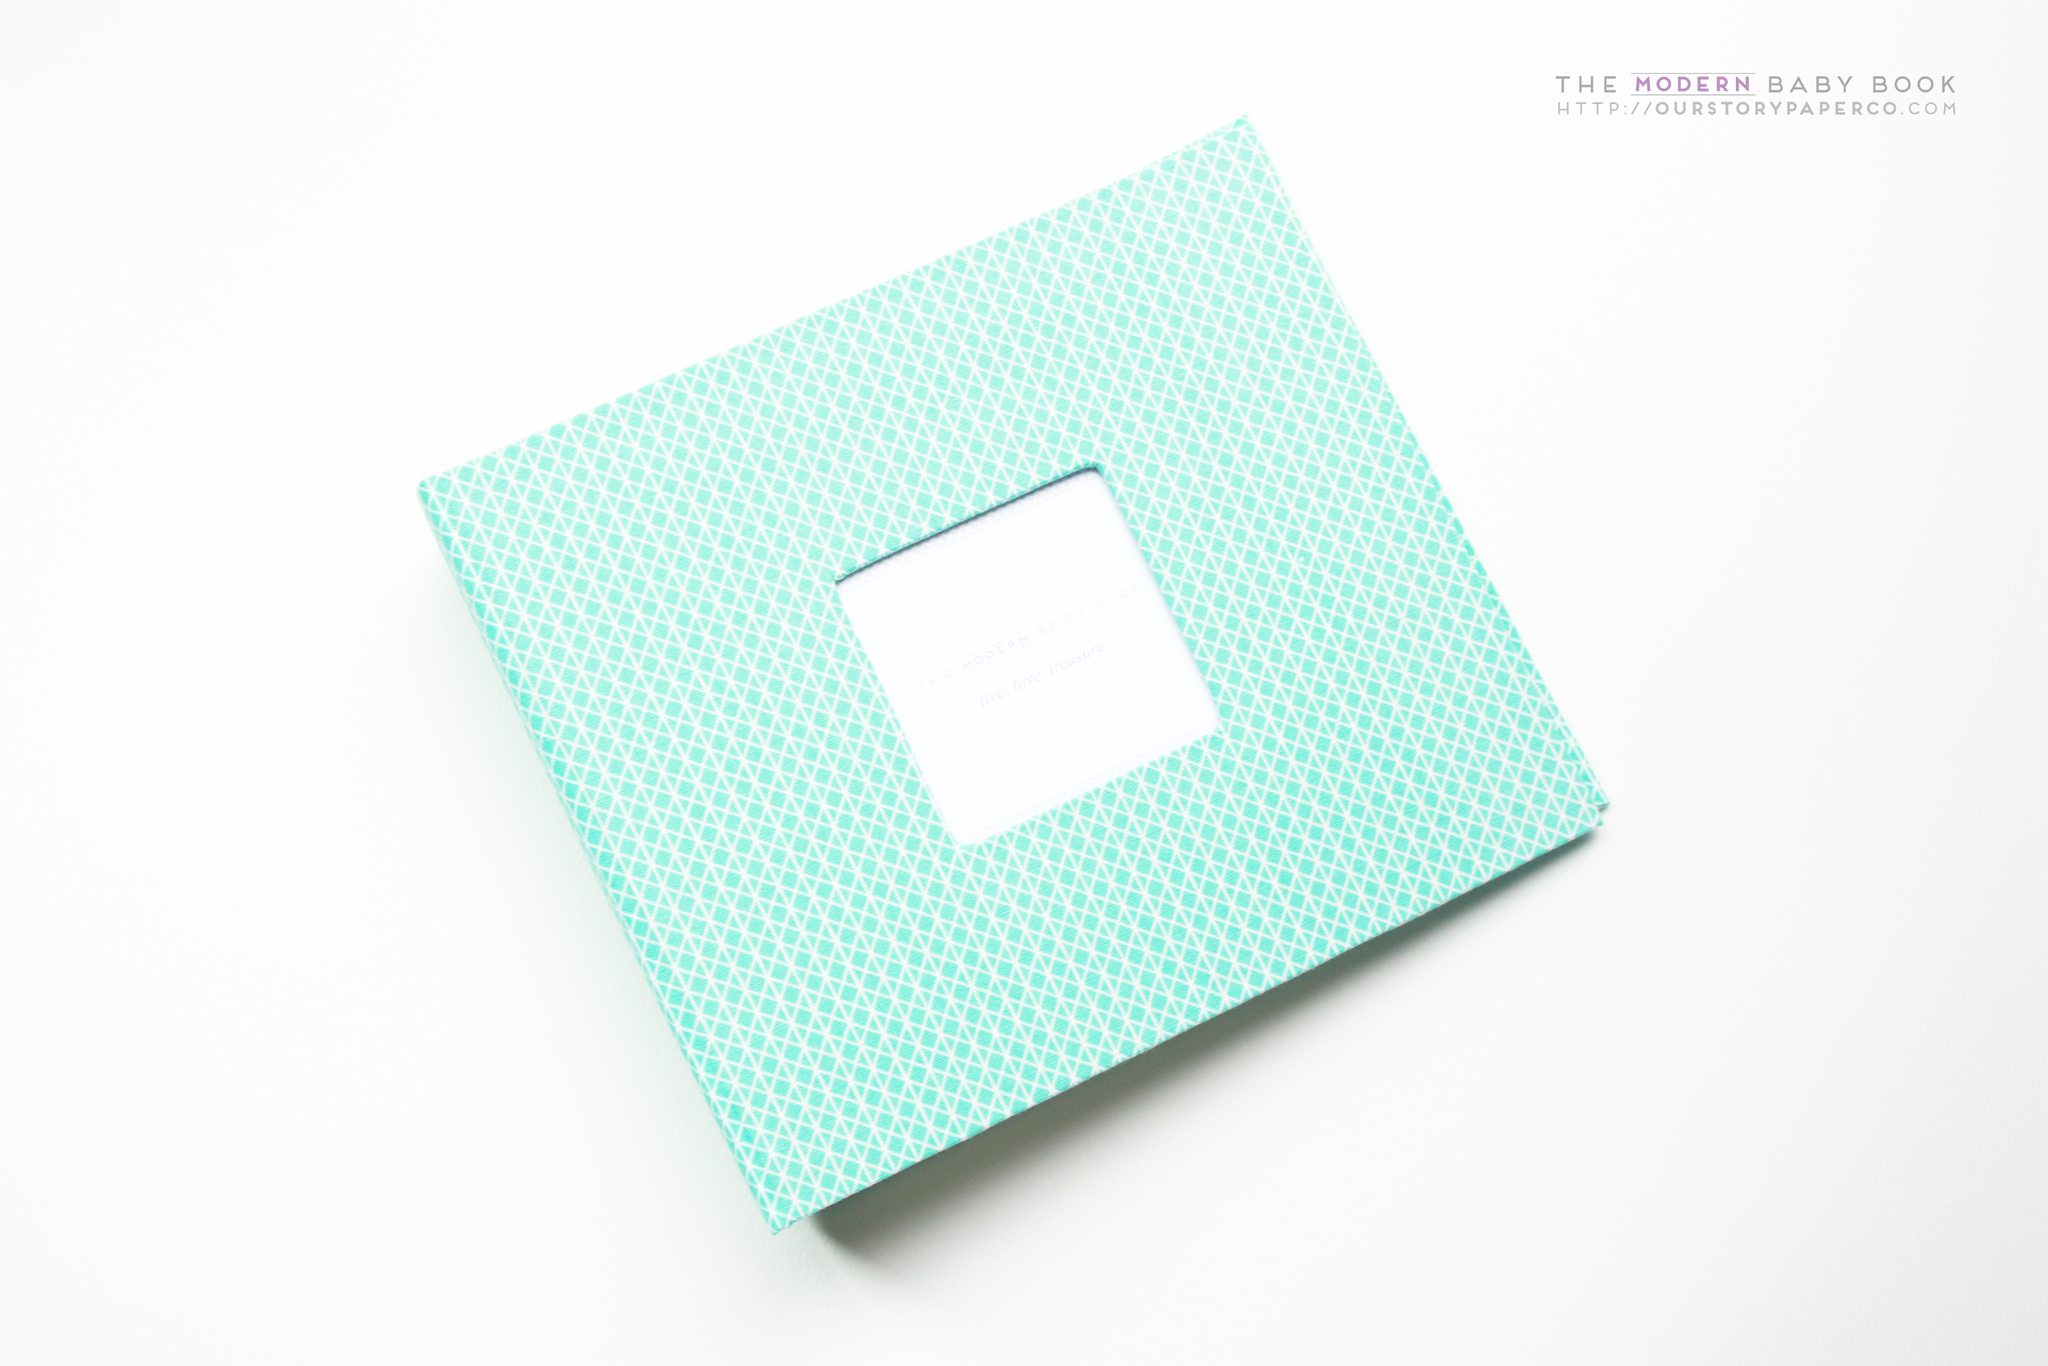 Mint Green Diamond Cross  Modern Baby Book - Our Story Paper Co.